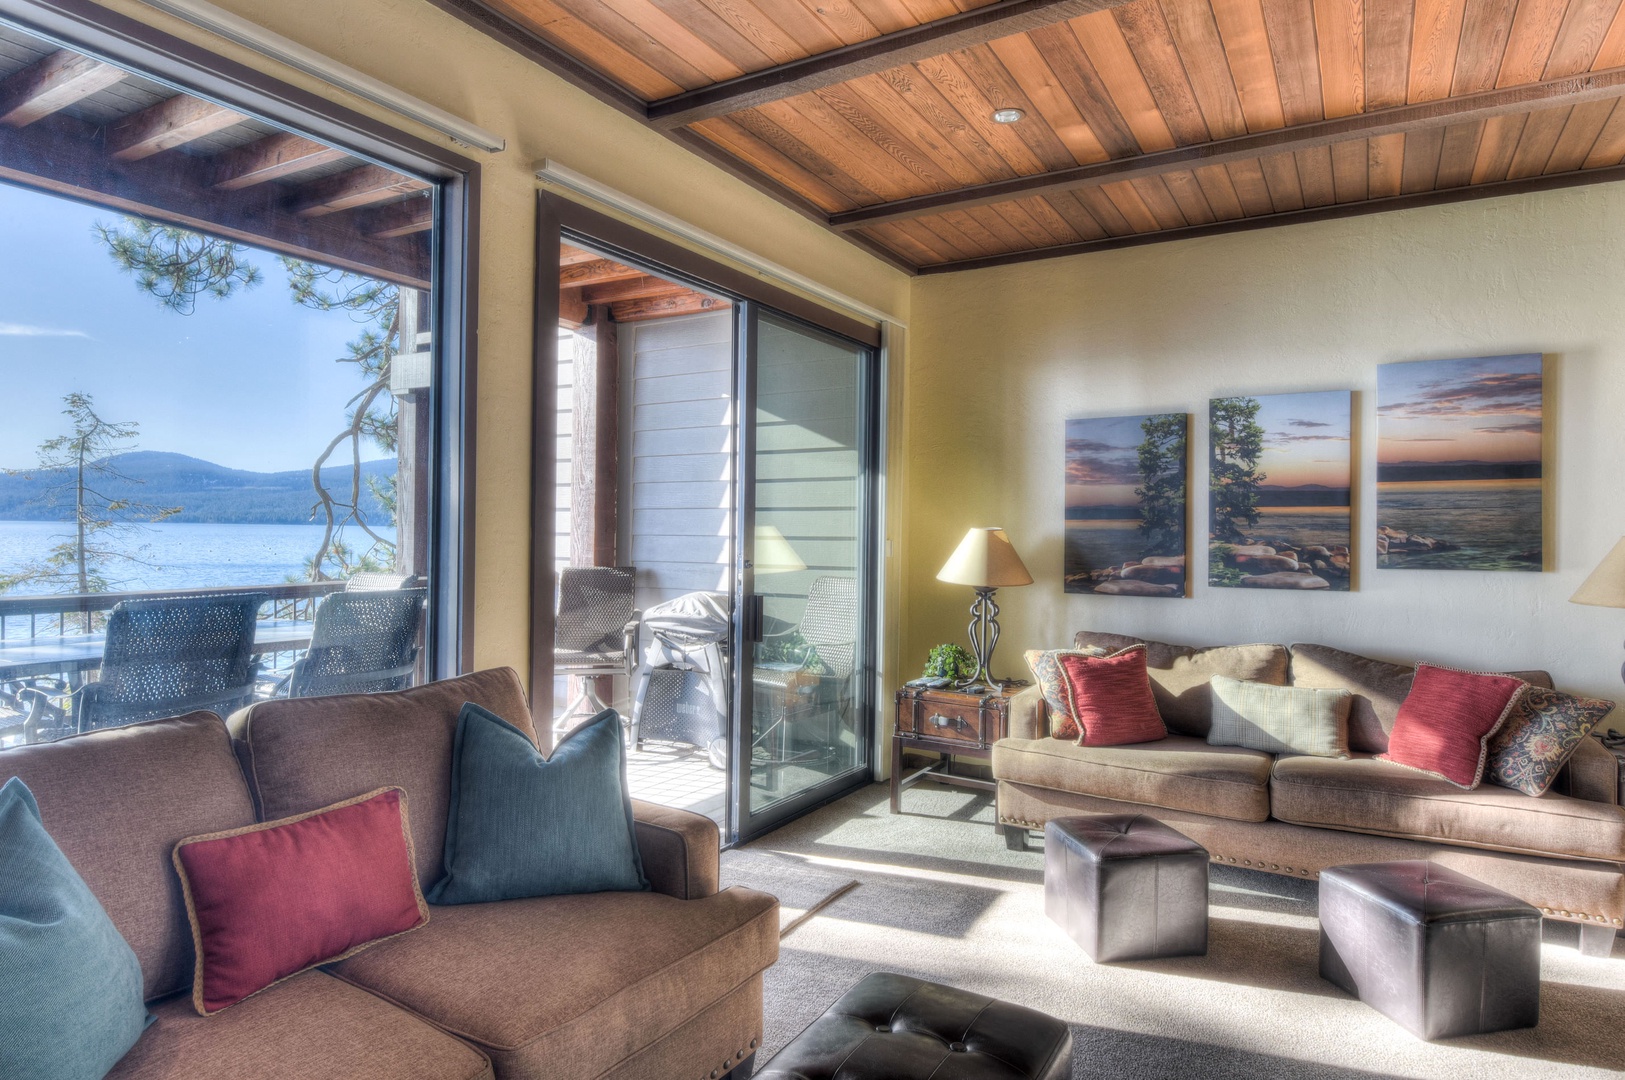 Expansive lake views from everywhere in the living room!